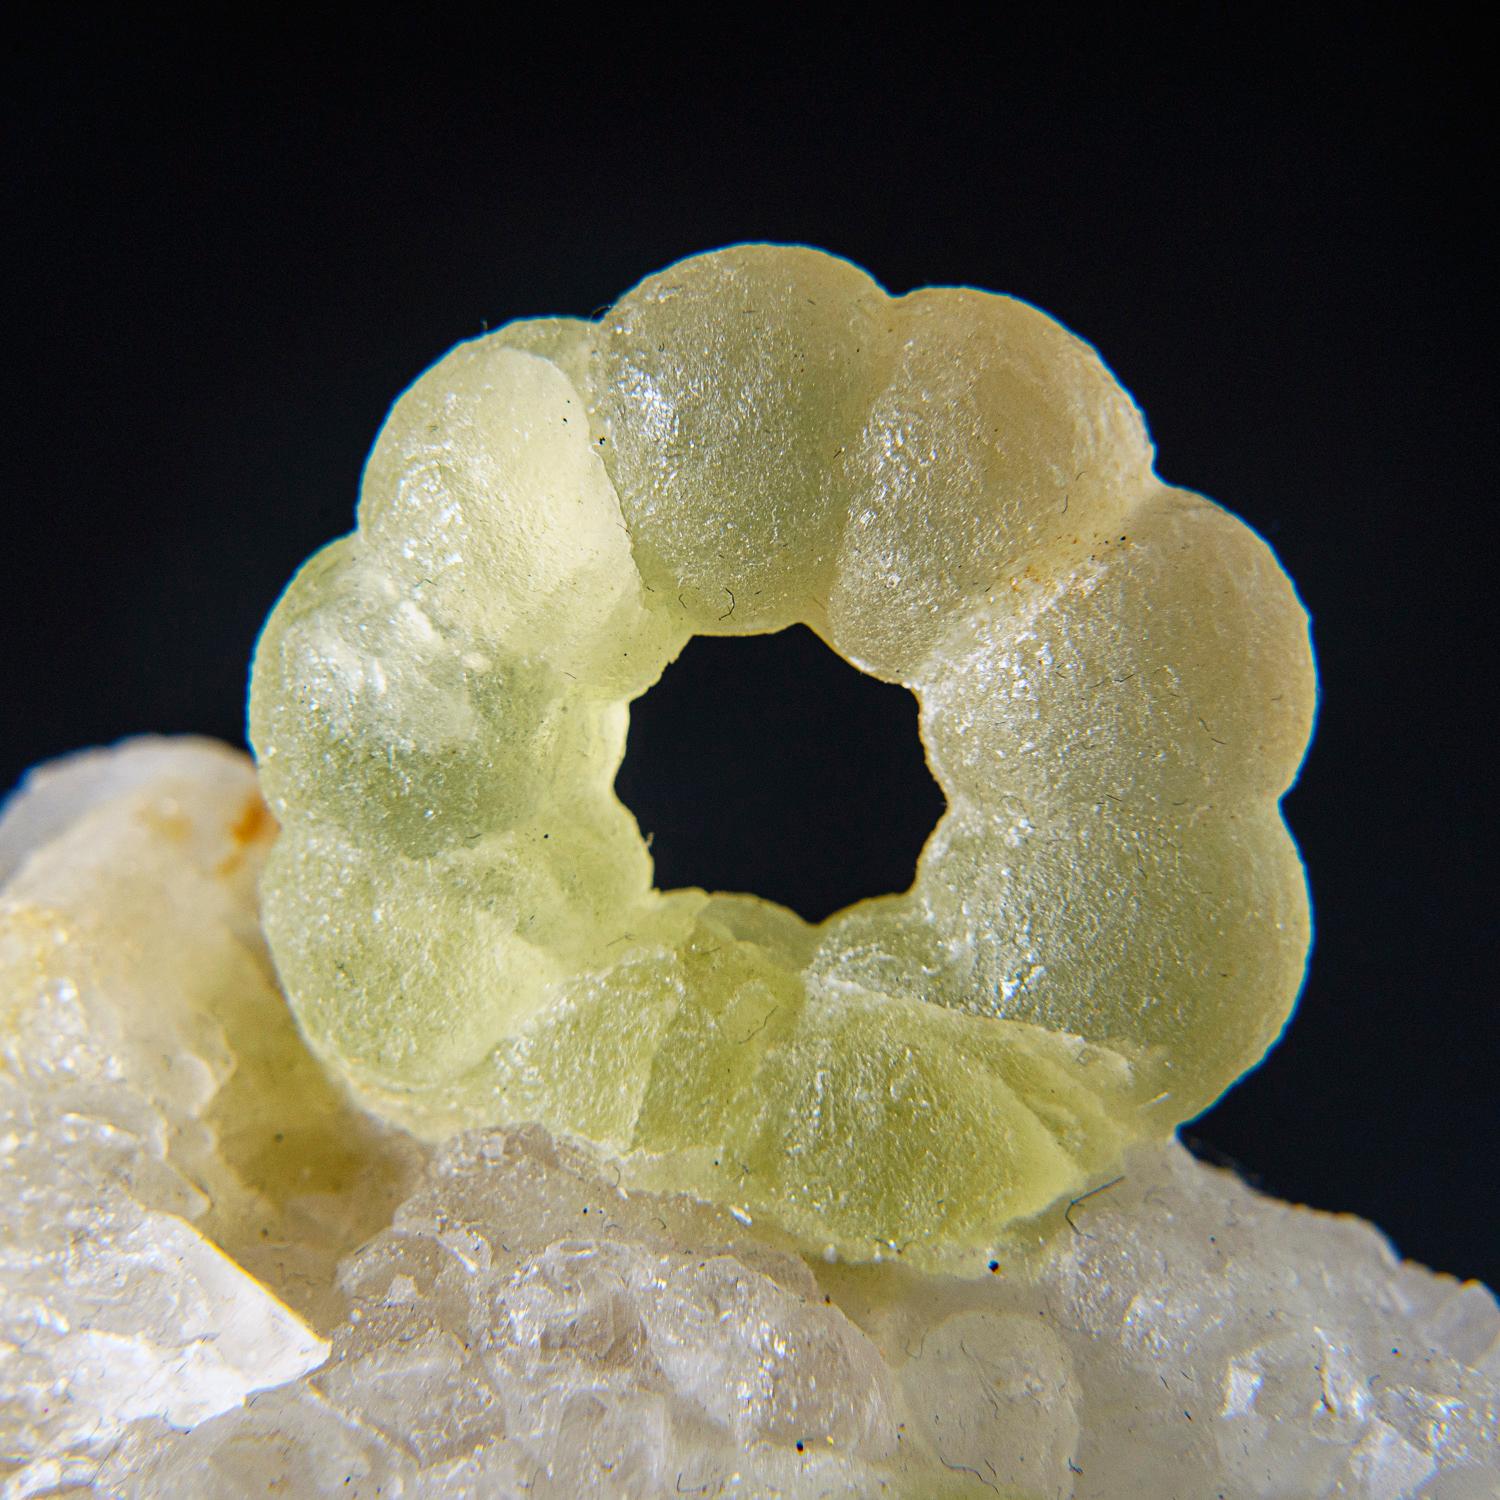 From De'an Mine, Wushan, Jiangxi Province, China

Lustrous botryoidal </span>green fluorite crystals on white quartz crystals. The quartz crystals are octahedral form with satin luster on the crystal faces caused by microscopic crystallization